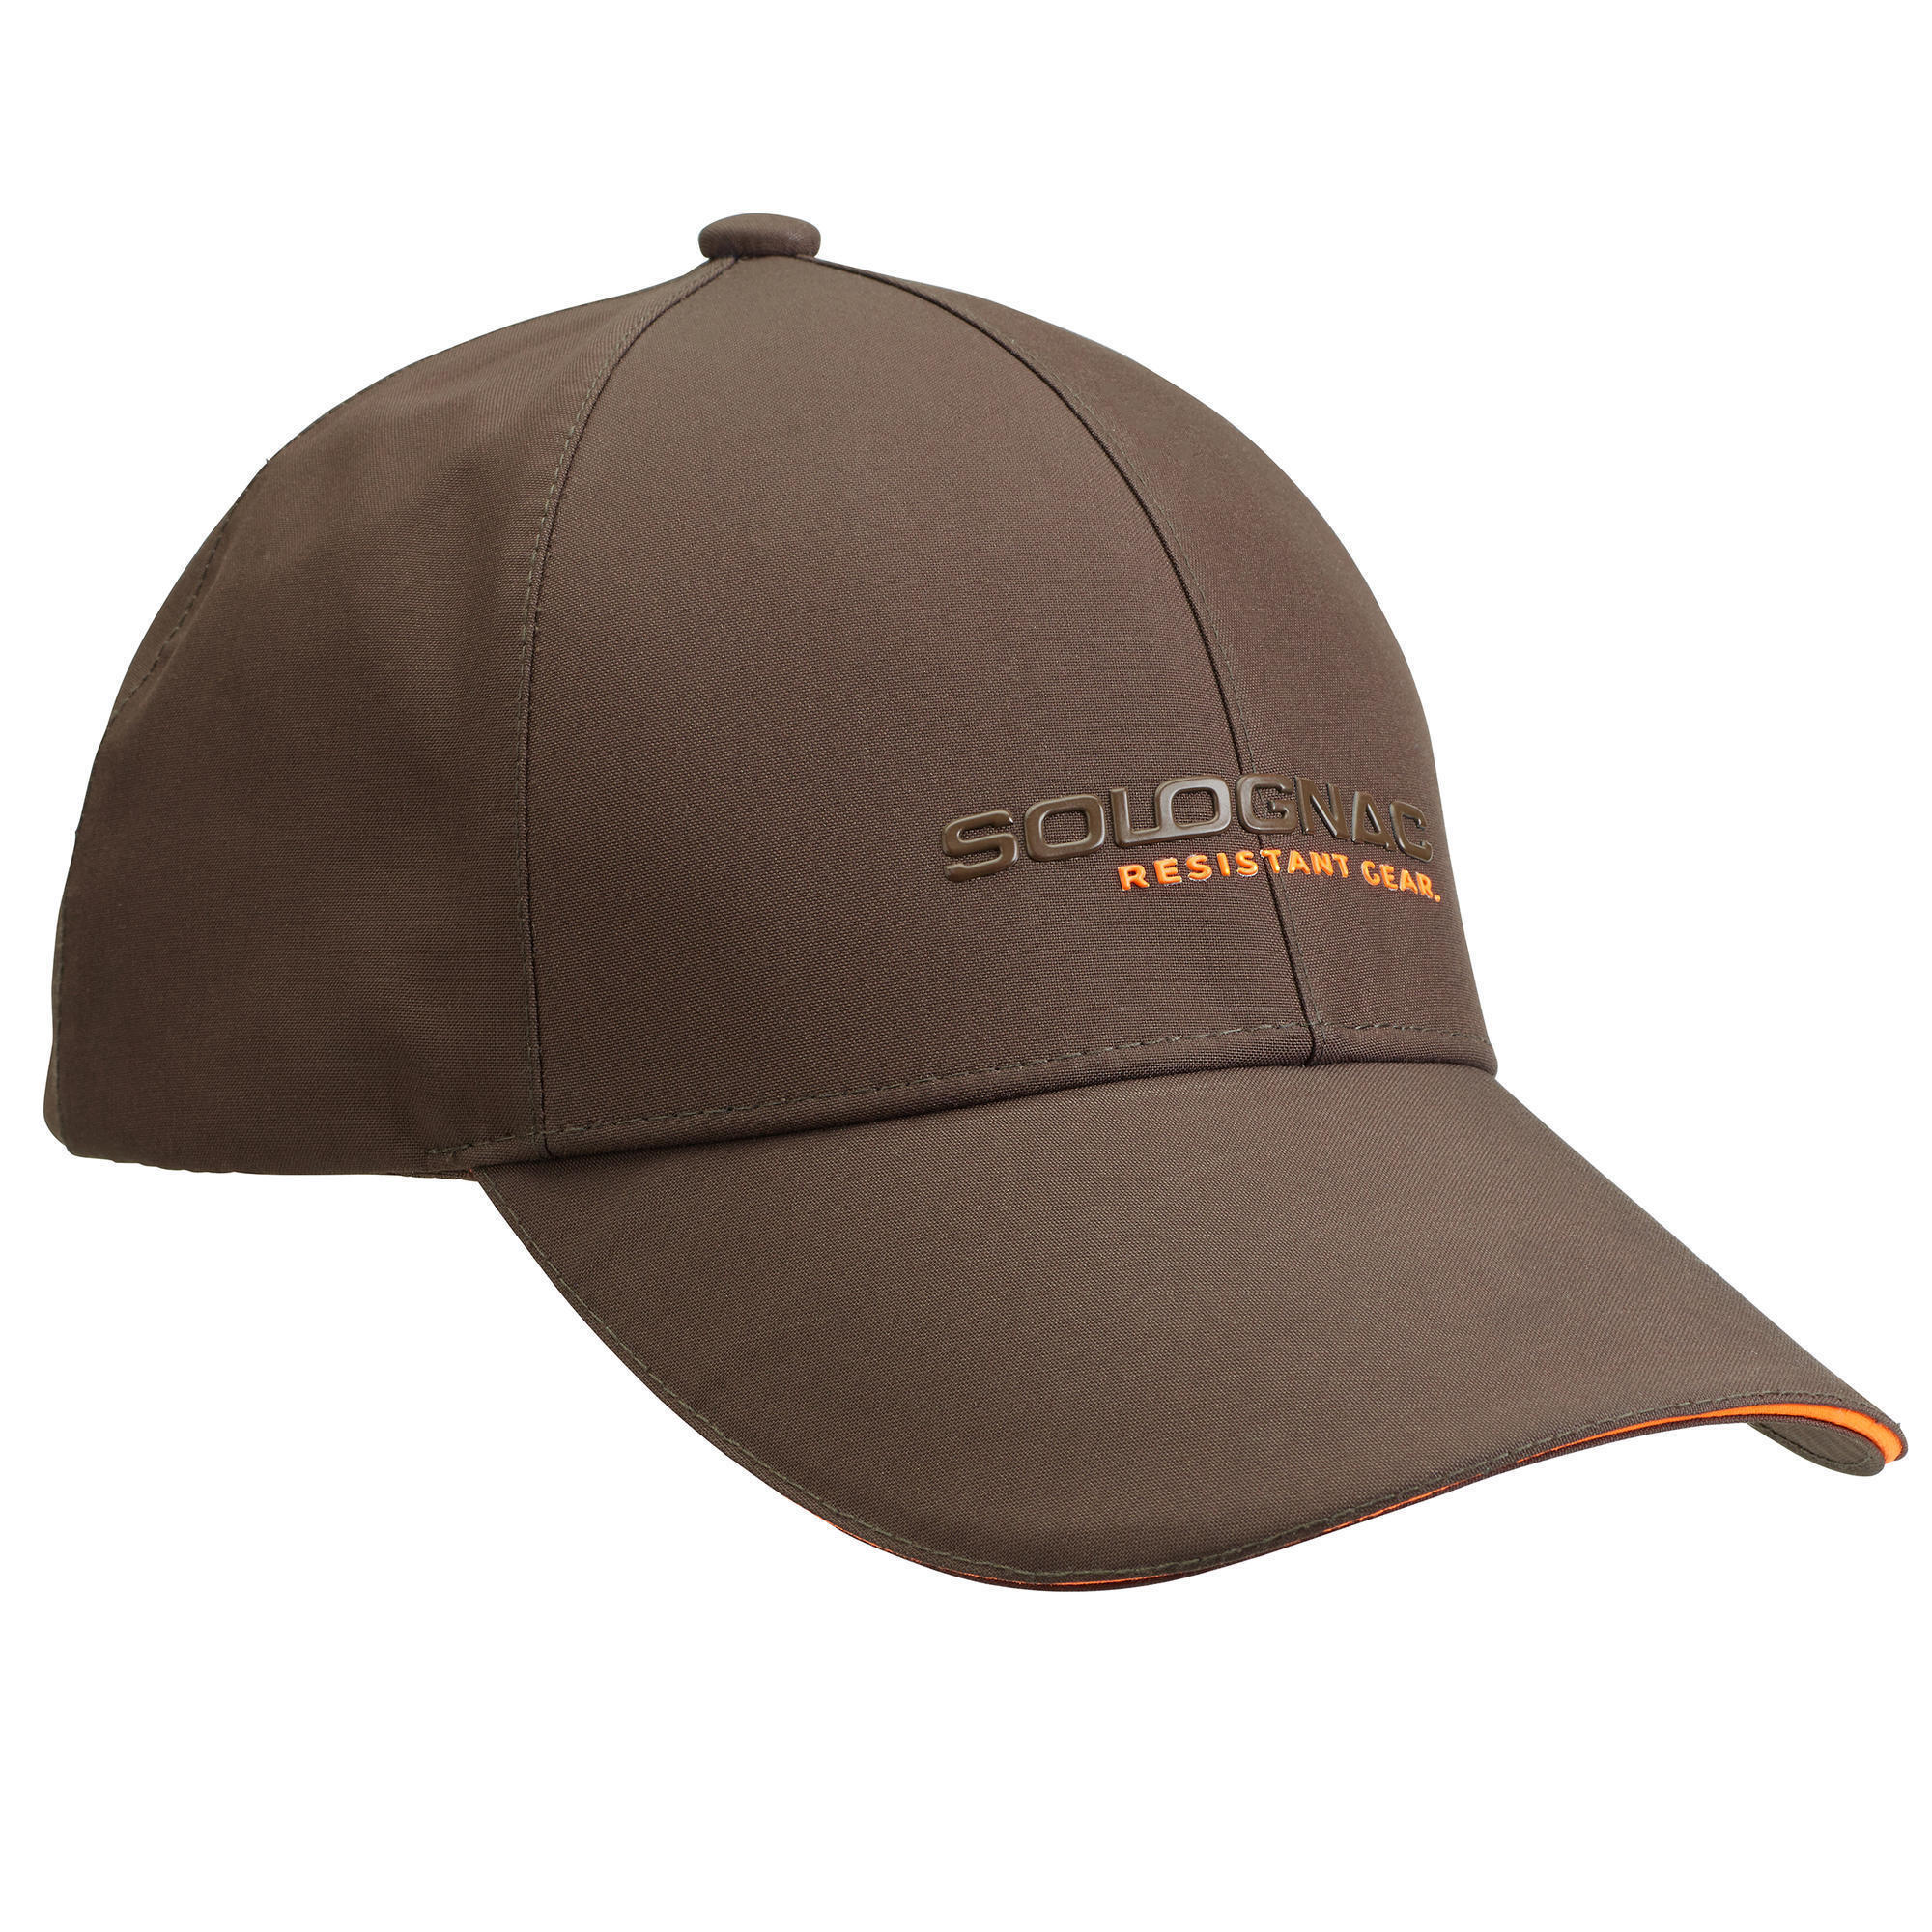 Solognac Waterproof Country Sport Cap 500 - Brown - One Size